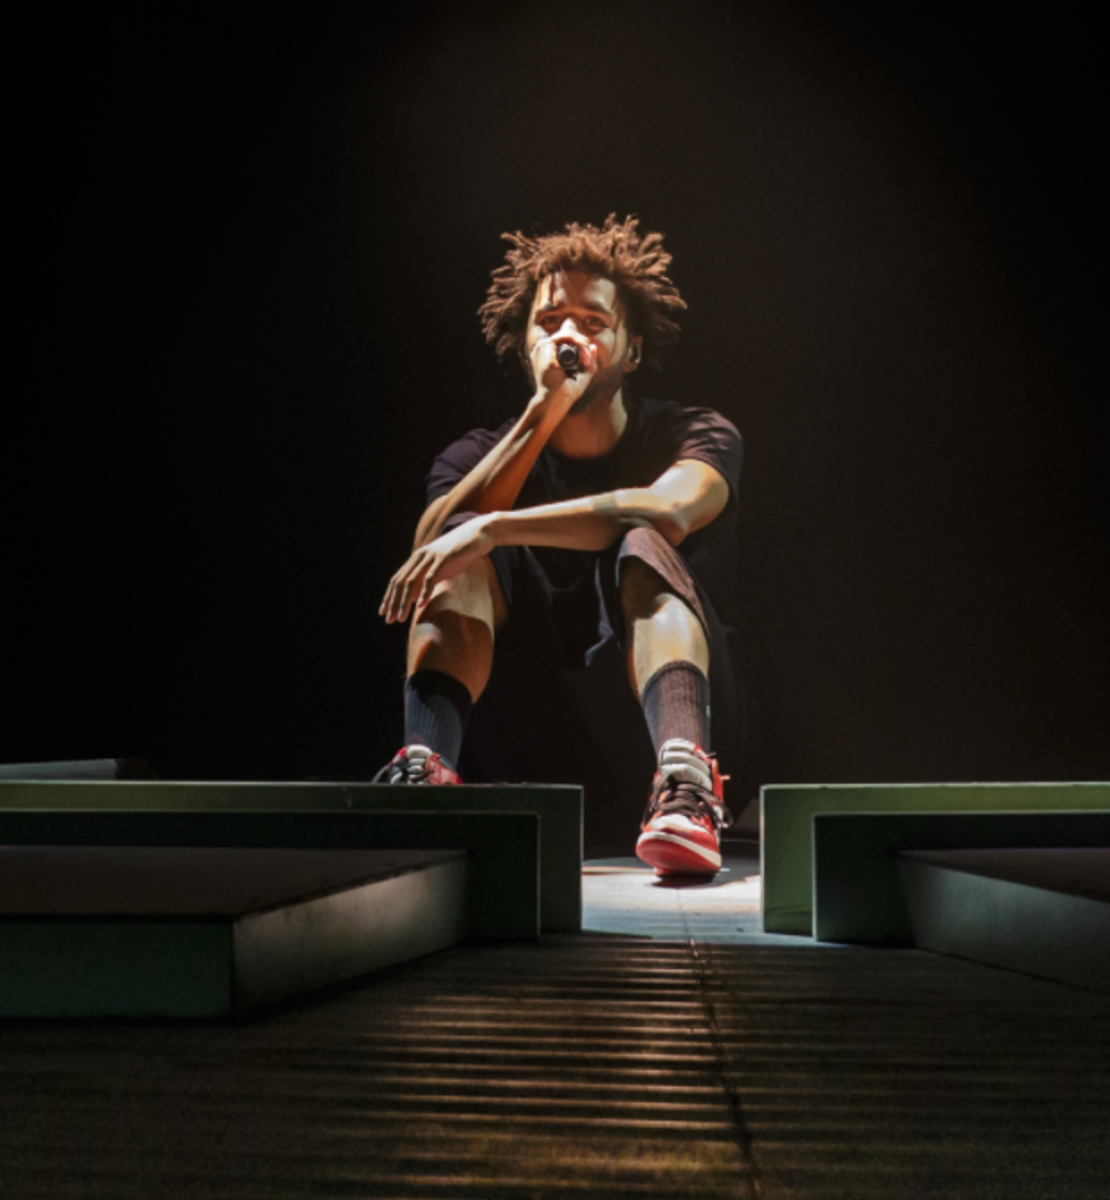 download jcole 4 your eyez only free